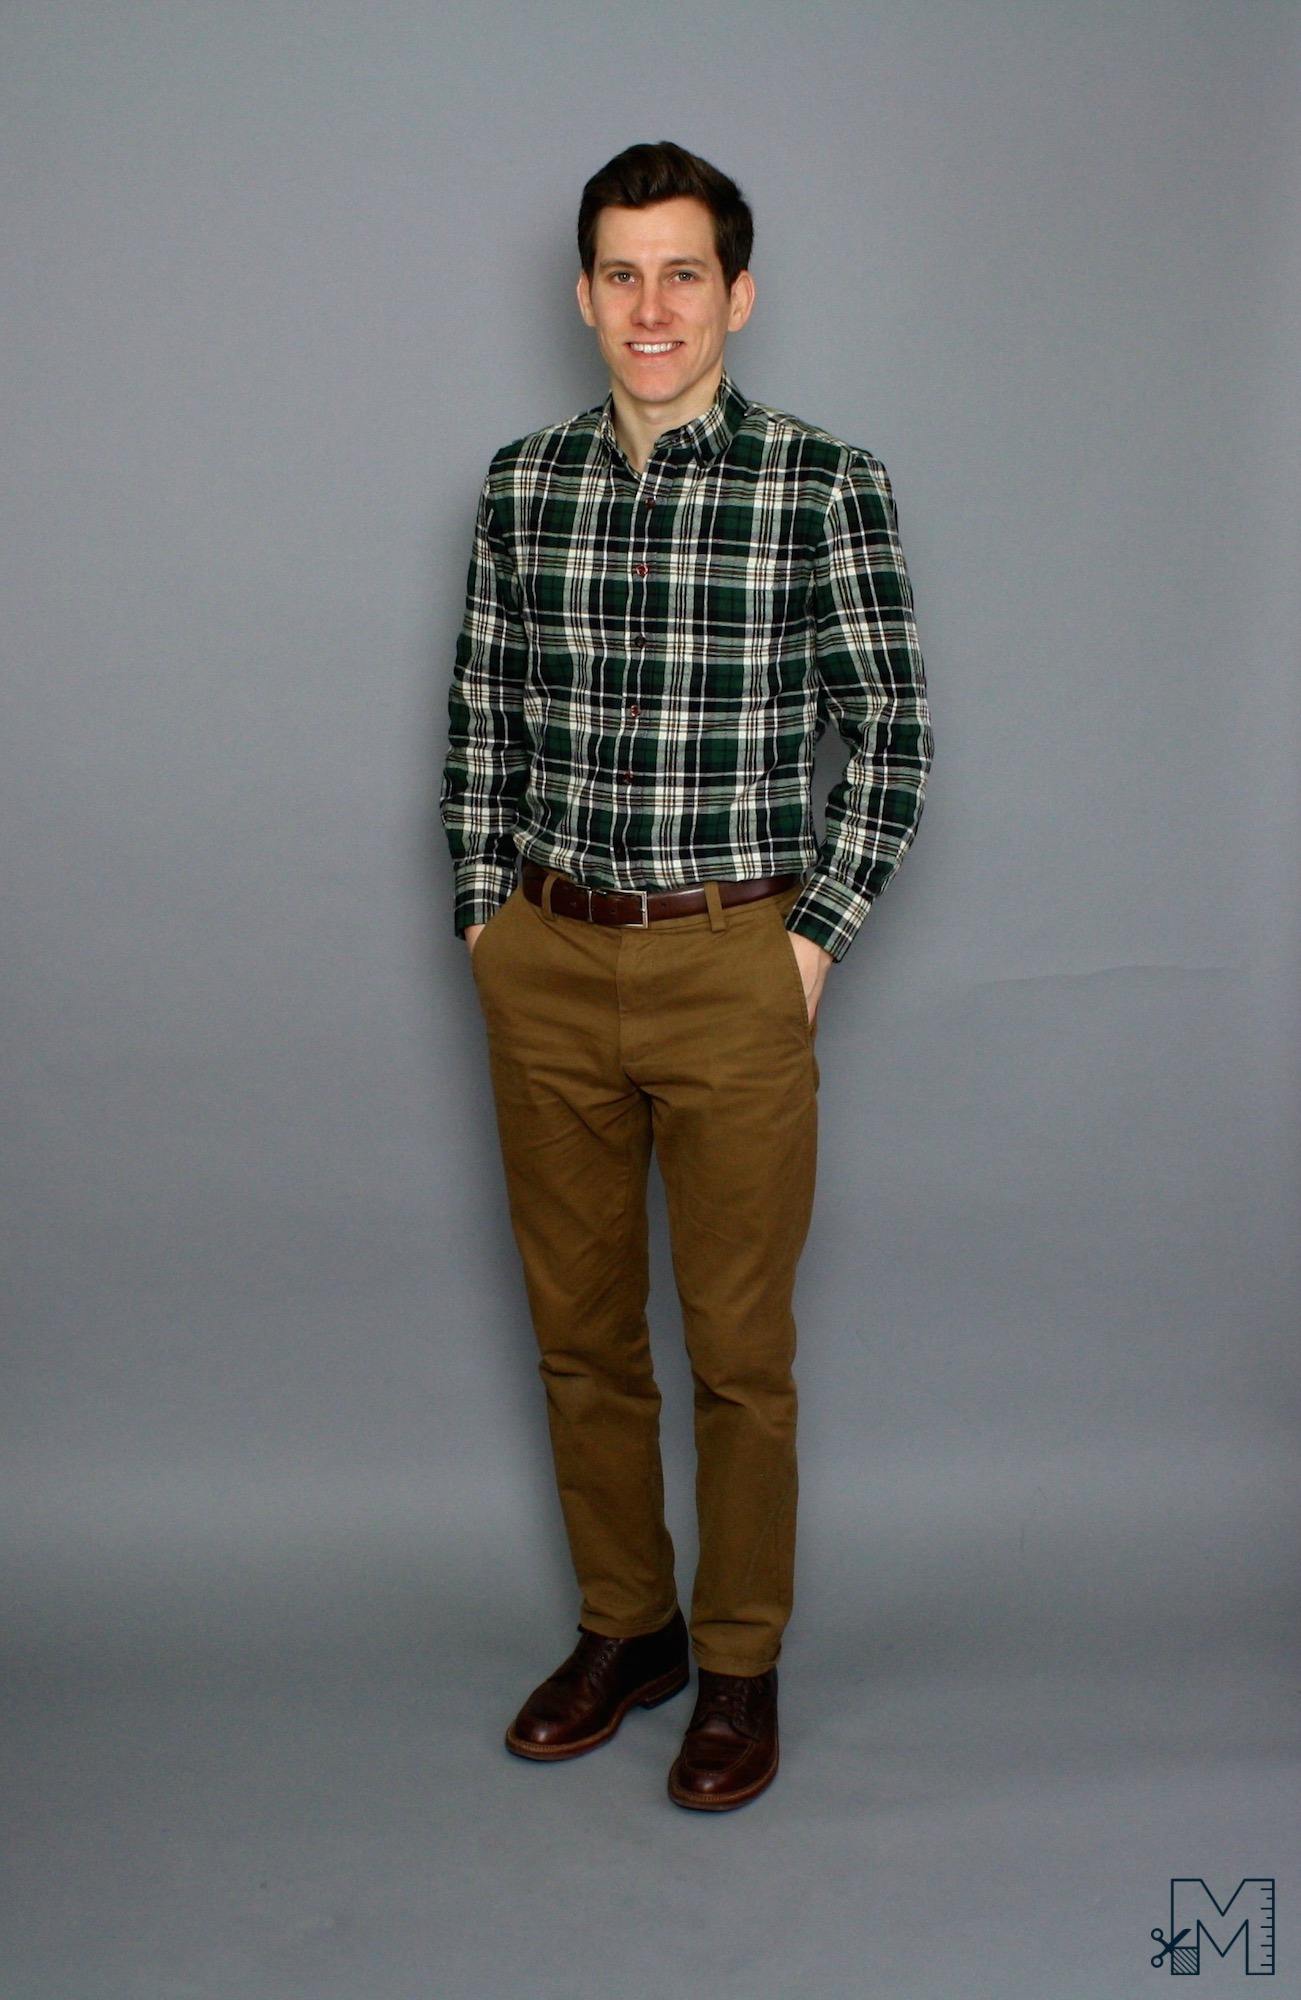 How To Wear A Flannel Shirt - Style Tips For Flannels (Beyond Plaid)